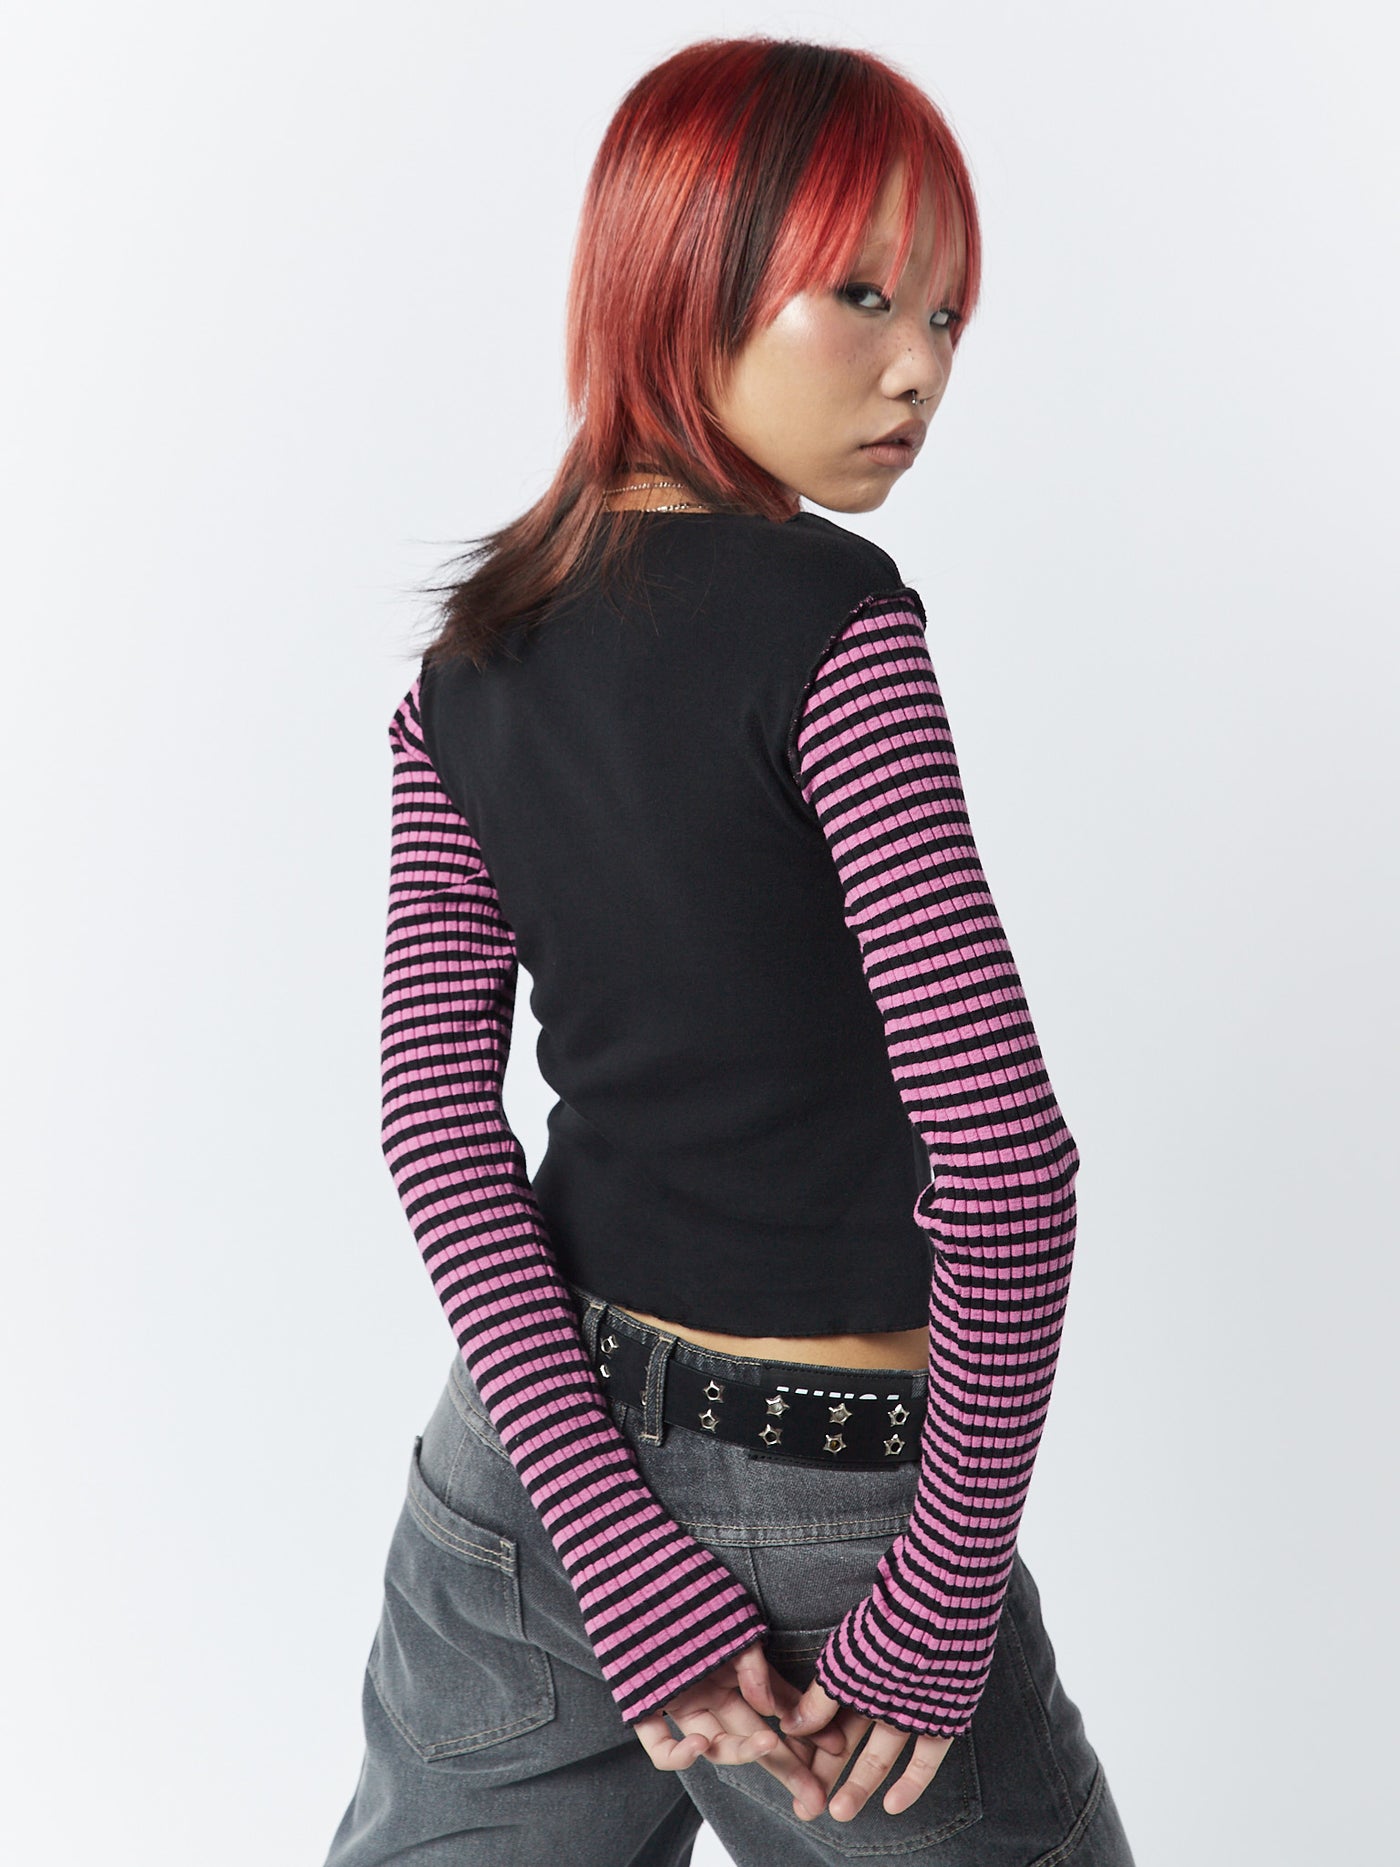 A long sleeve top with pink and black stripes by Minga London. This top features a star patch, adding a unique and eye-catching detail to the overall design.